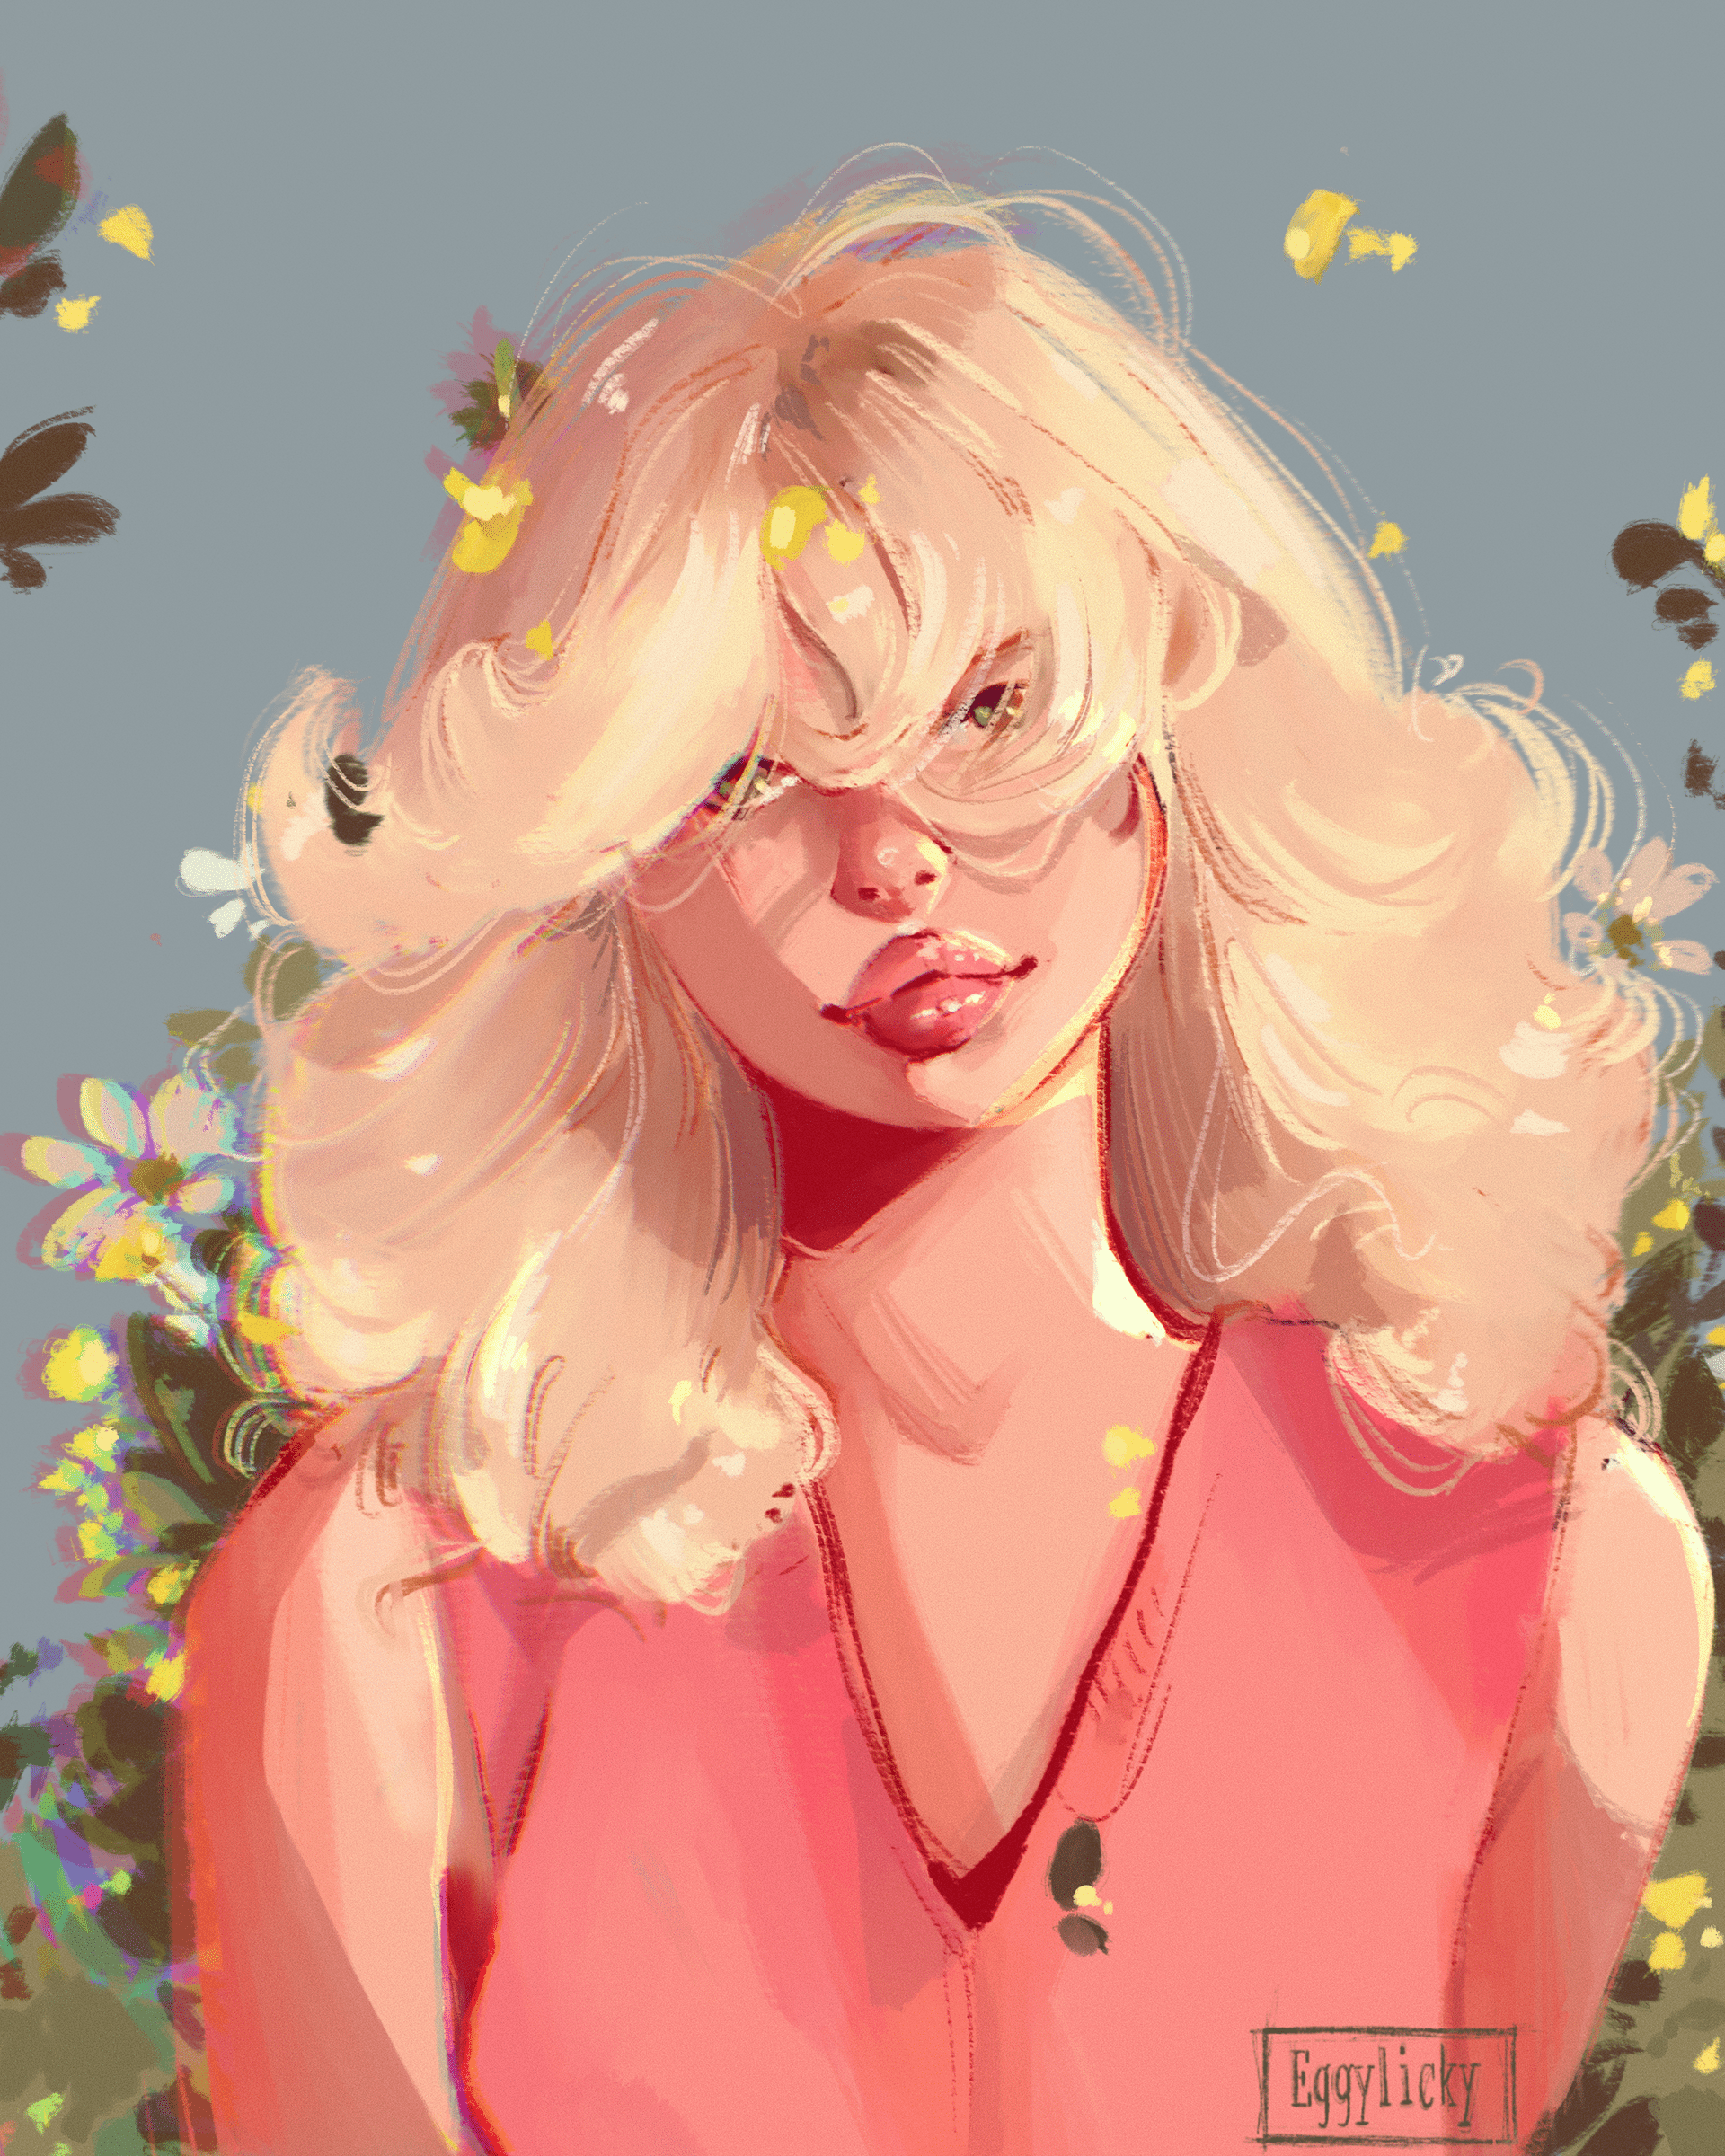 🌿Study of the day🌿